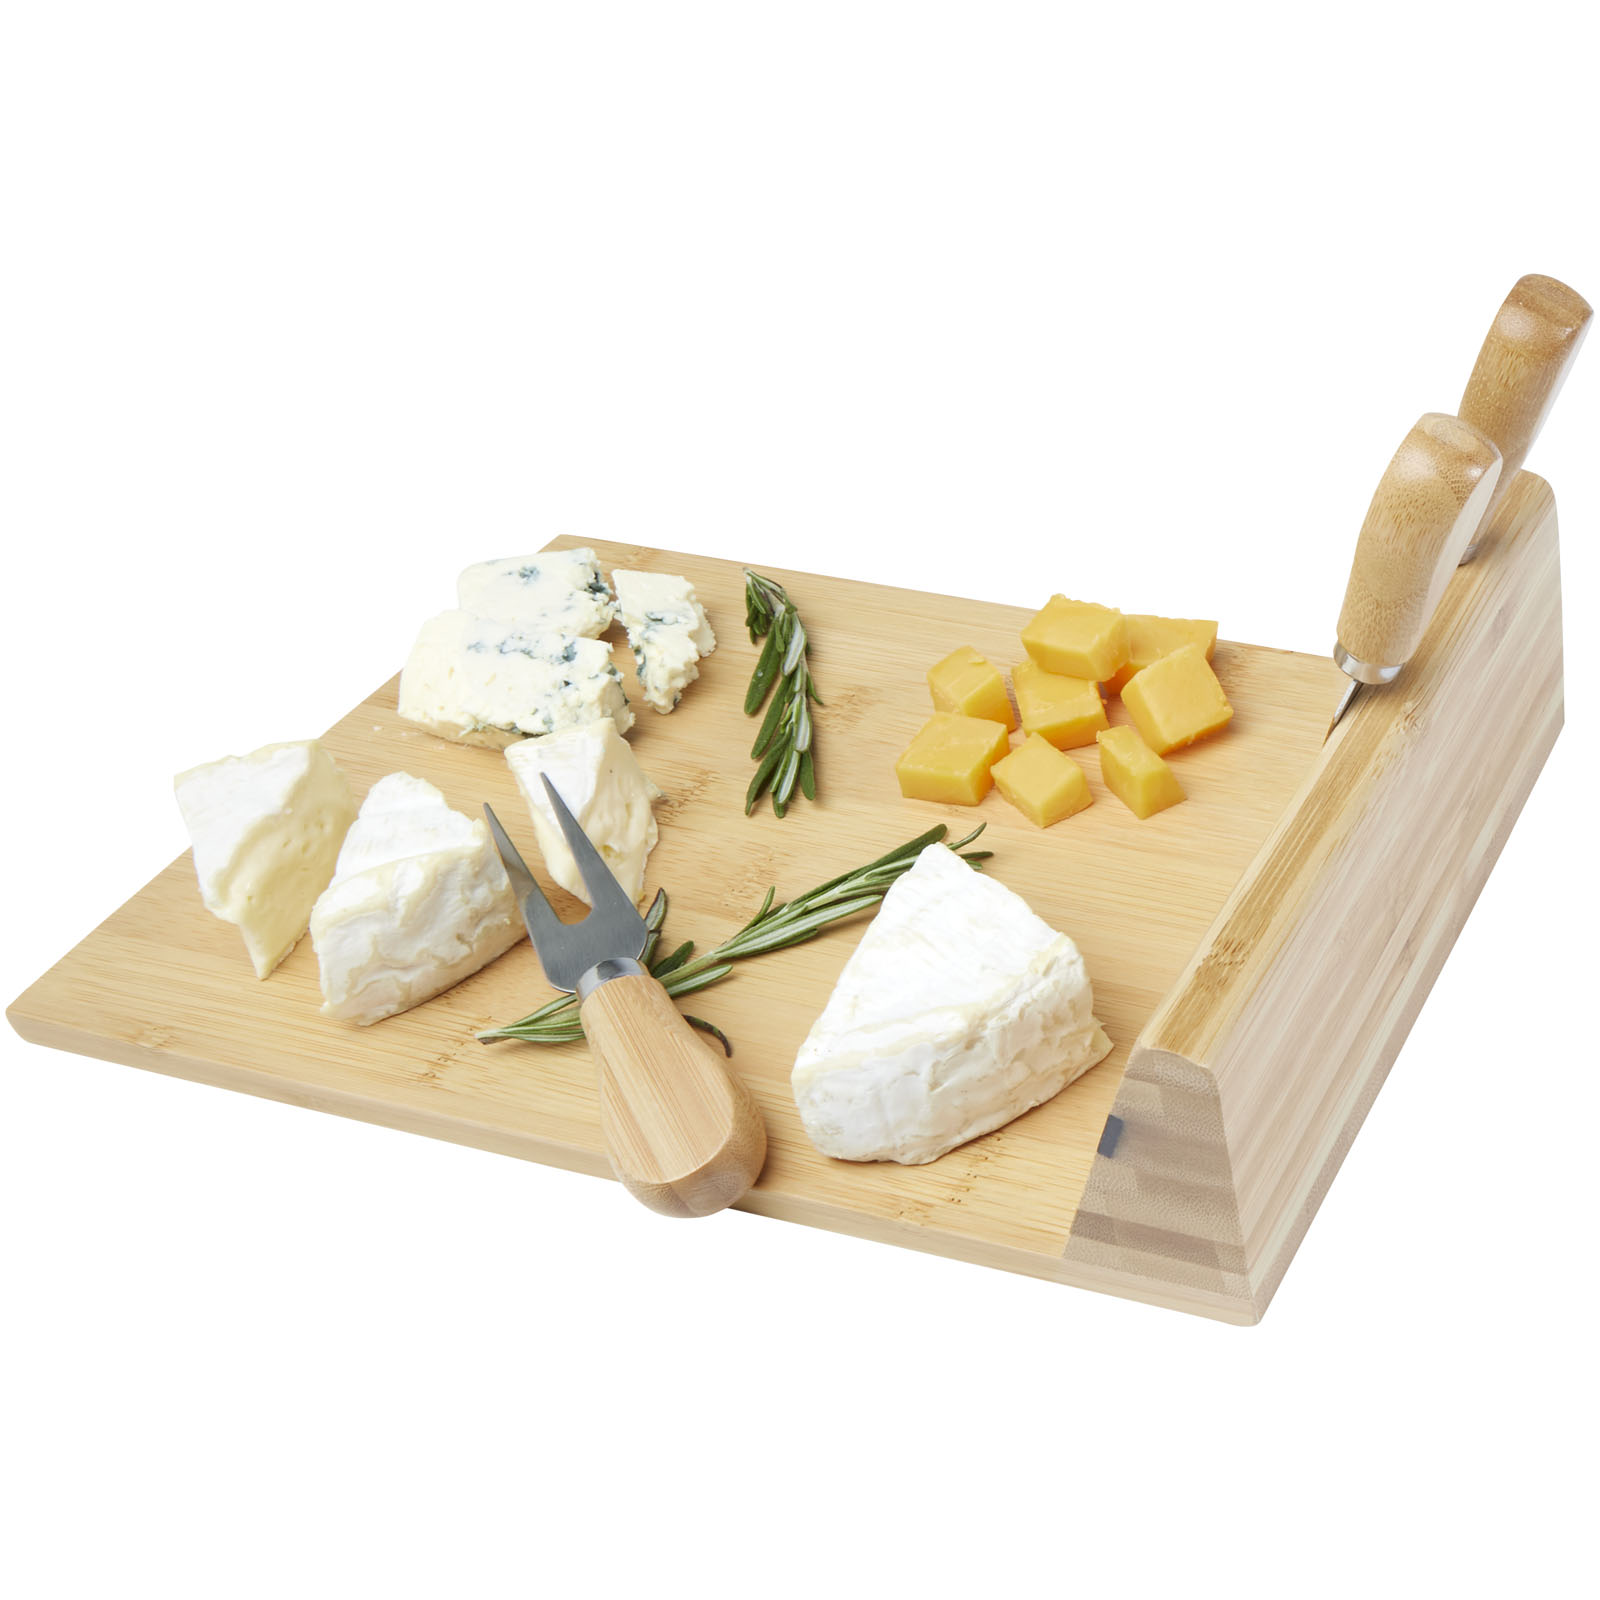 Advertising Serving Sets - Mancheg bamboo magnetic cheese board and tools - 3